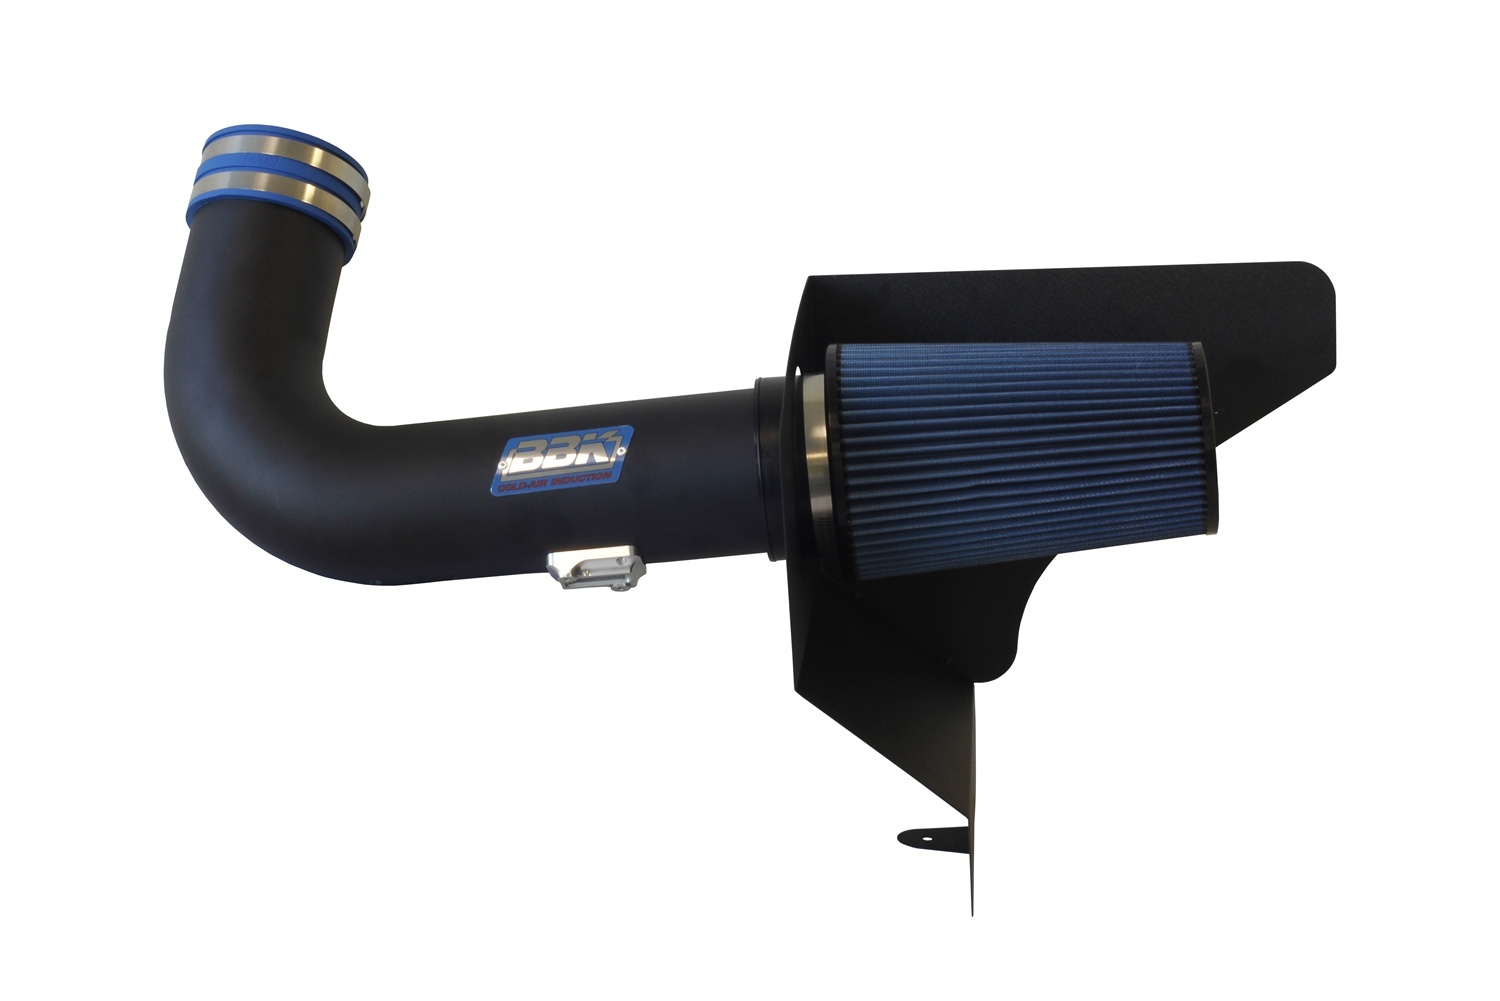 Camaro 2010-14, BBK Air Intake System, Power Plug Black Out, Reusable Oiled Filter, Black, GM LS-Series, Chevy